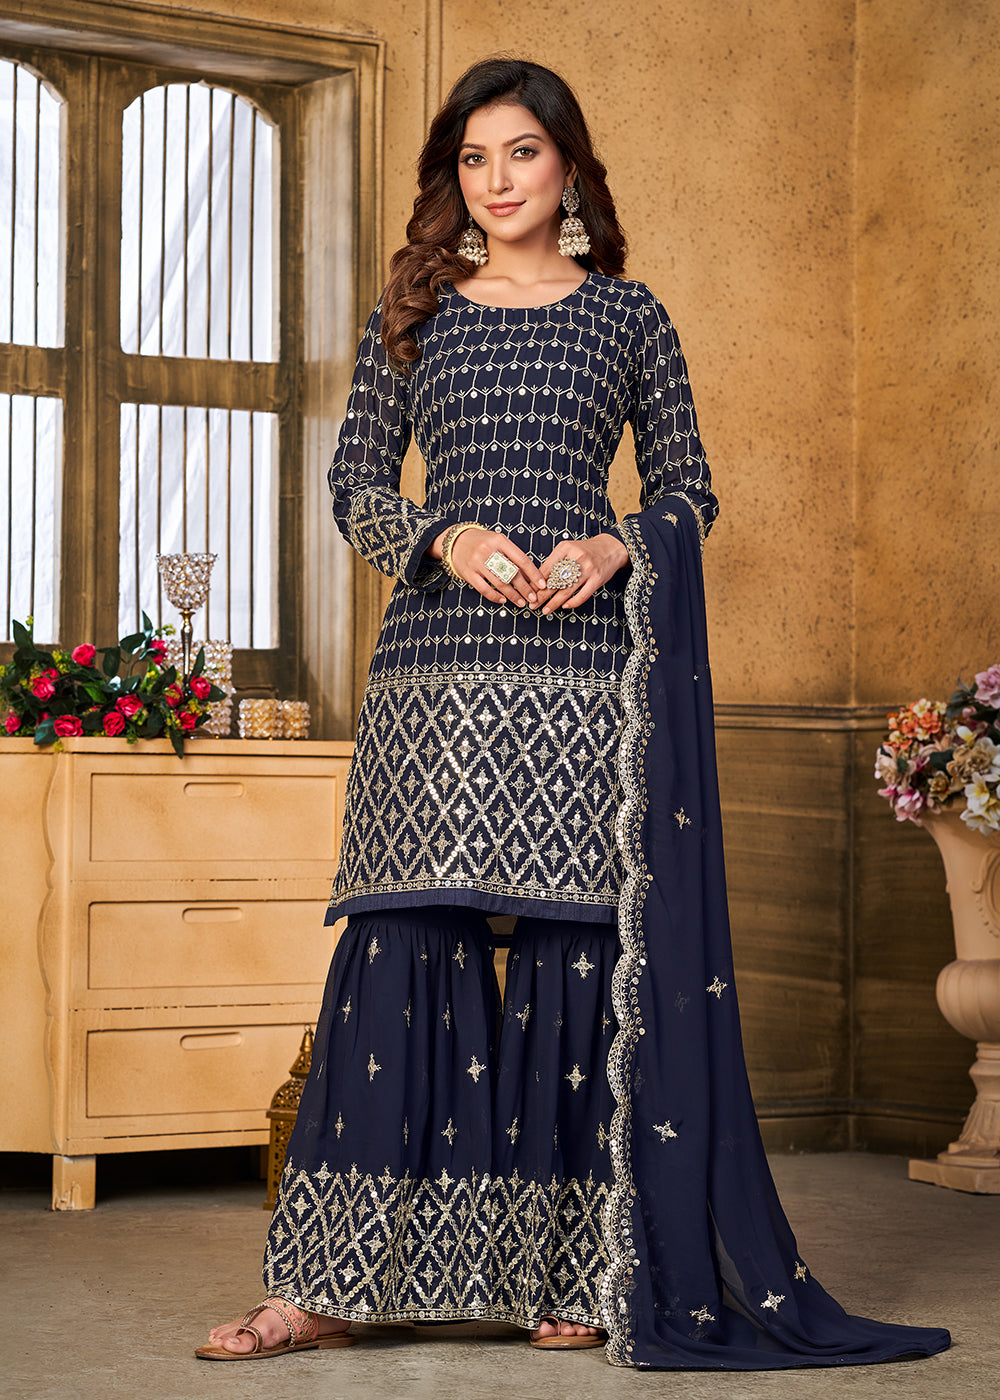 Shop Now Pretty Sequins Embroidered Blue Festive Gharara Style Suit Online at Empress Clothing in USA, UK, Canada, Italy & Worldwide.